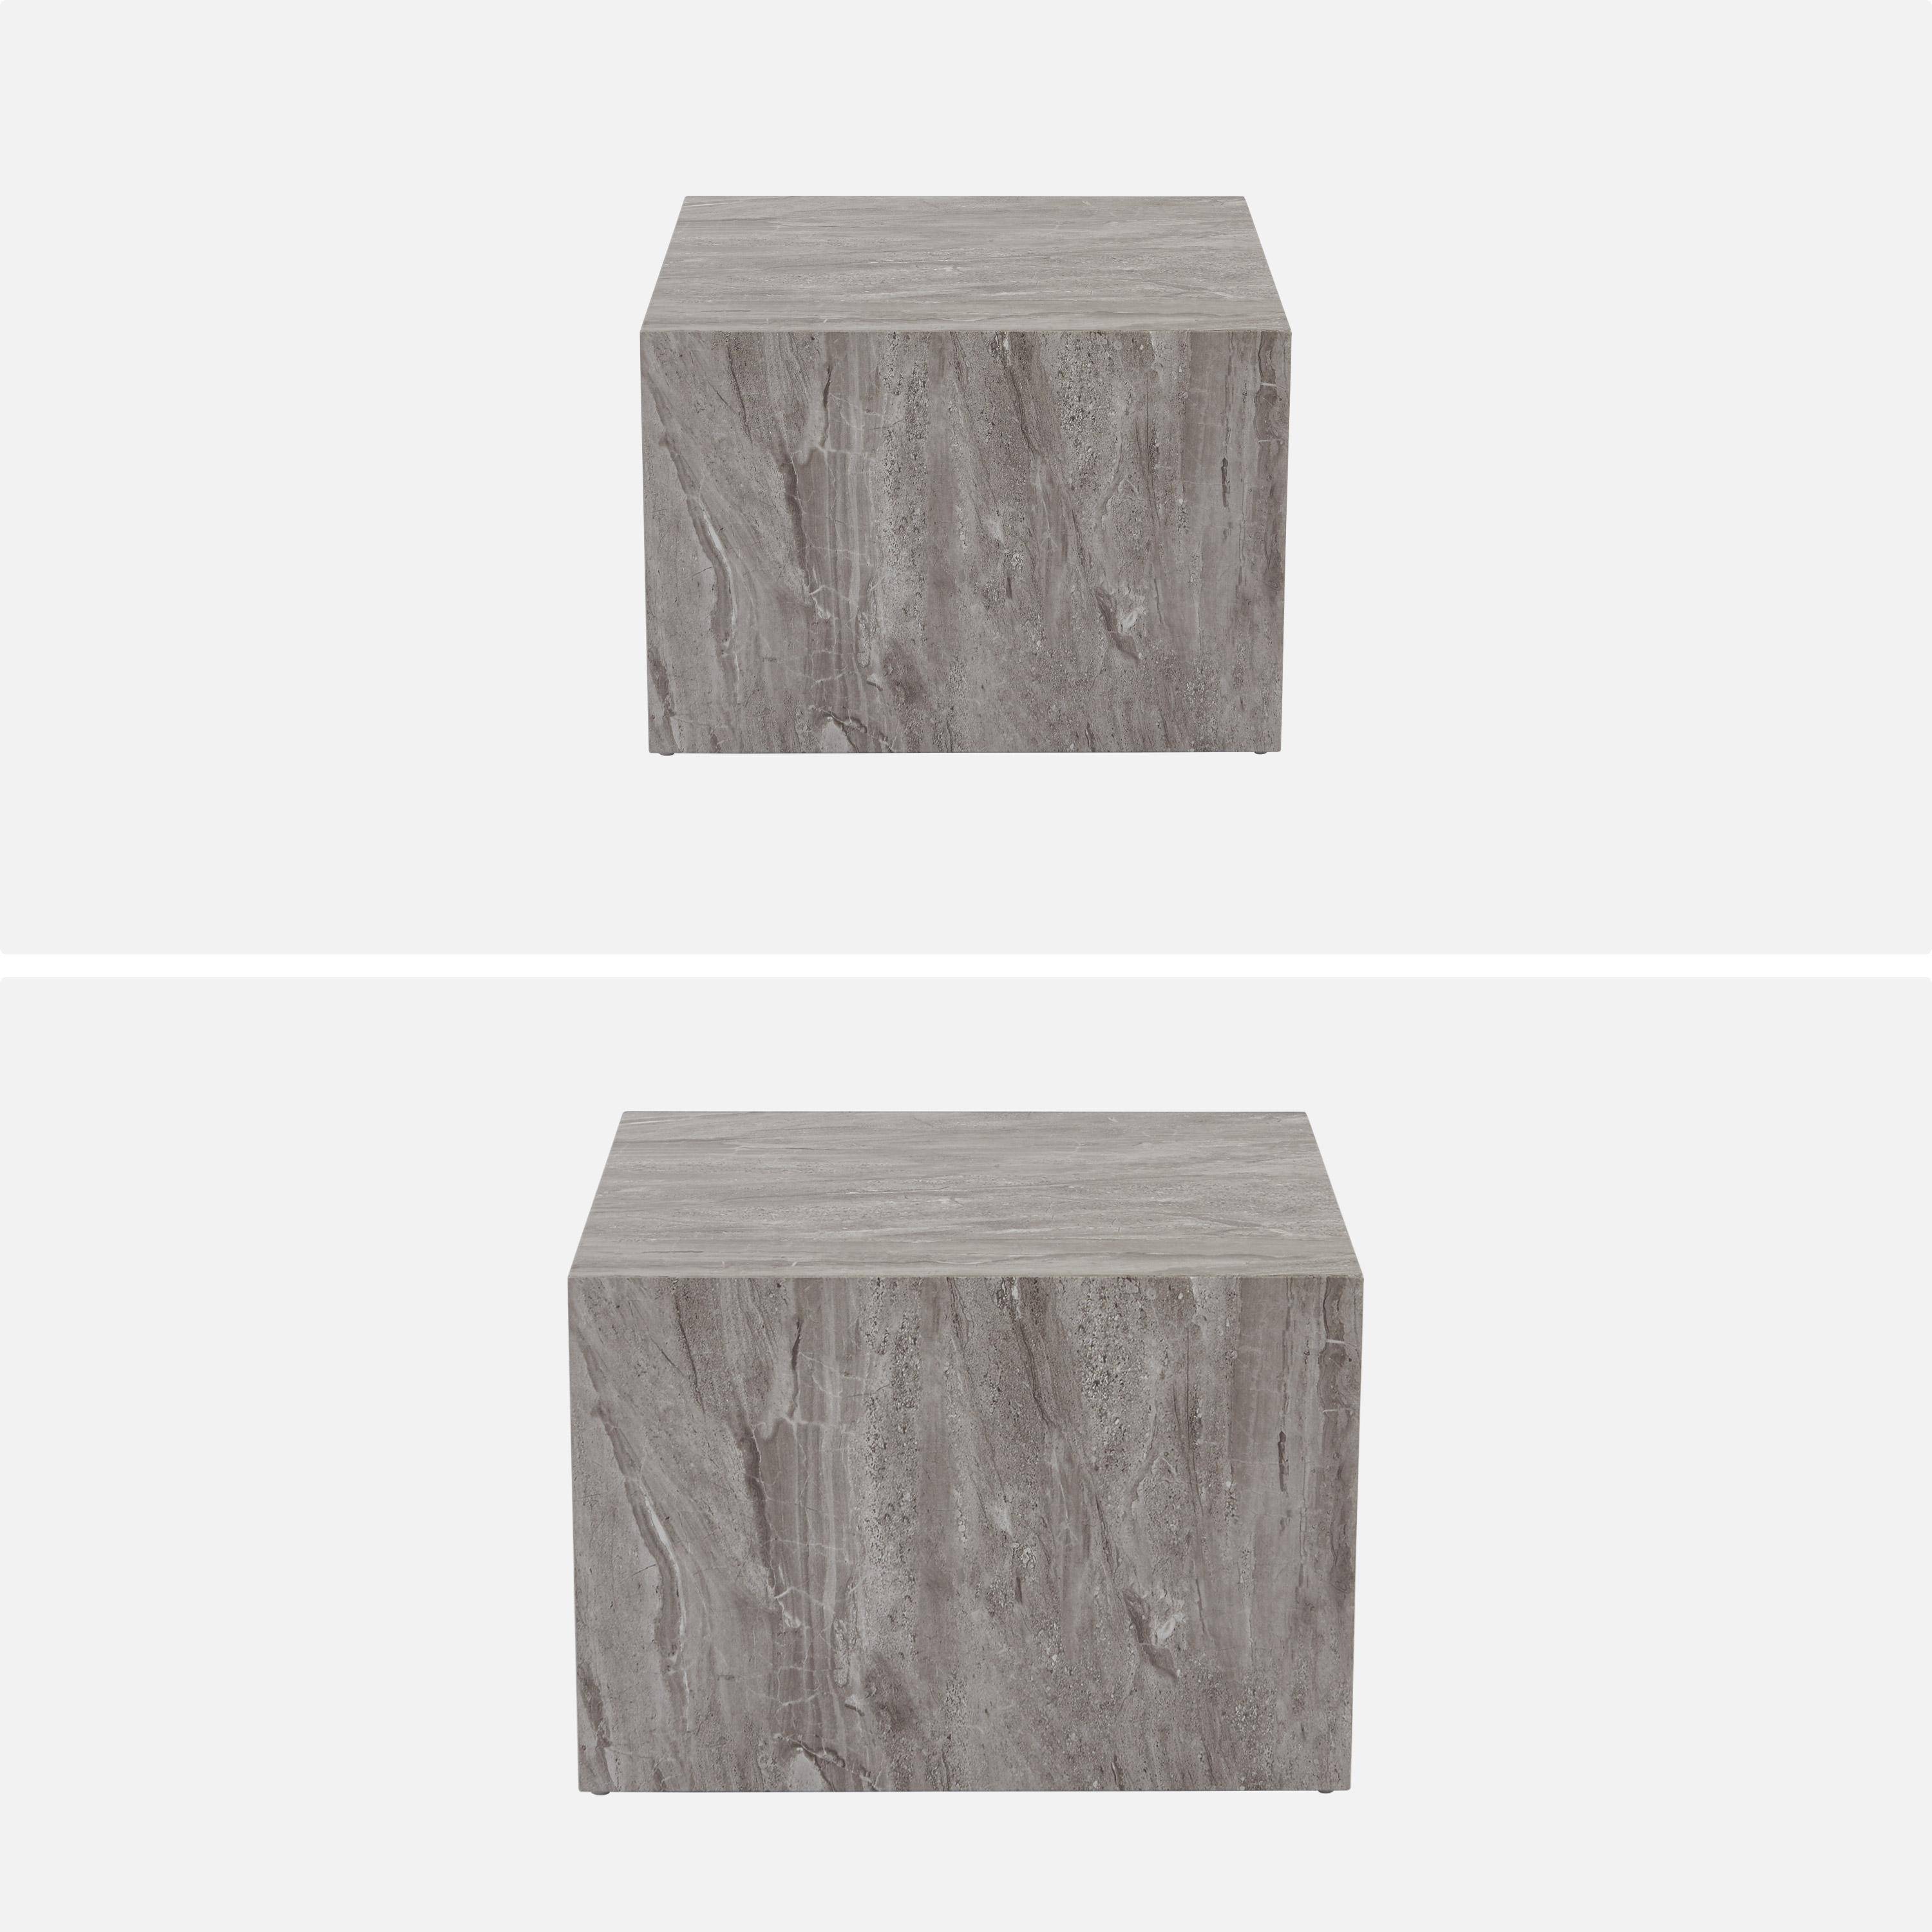 Set of 2 square coffee tables with marble effect, grey, L50xW50xH33cm &  L58xW58xH40cm, Paros,sweeek,Photo5